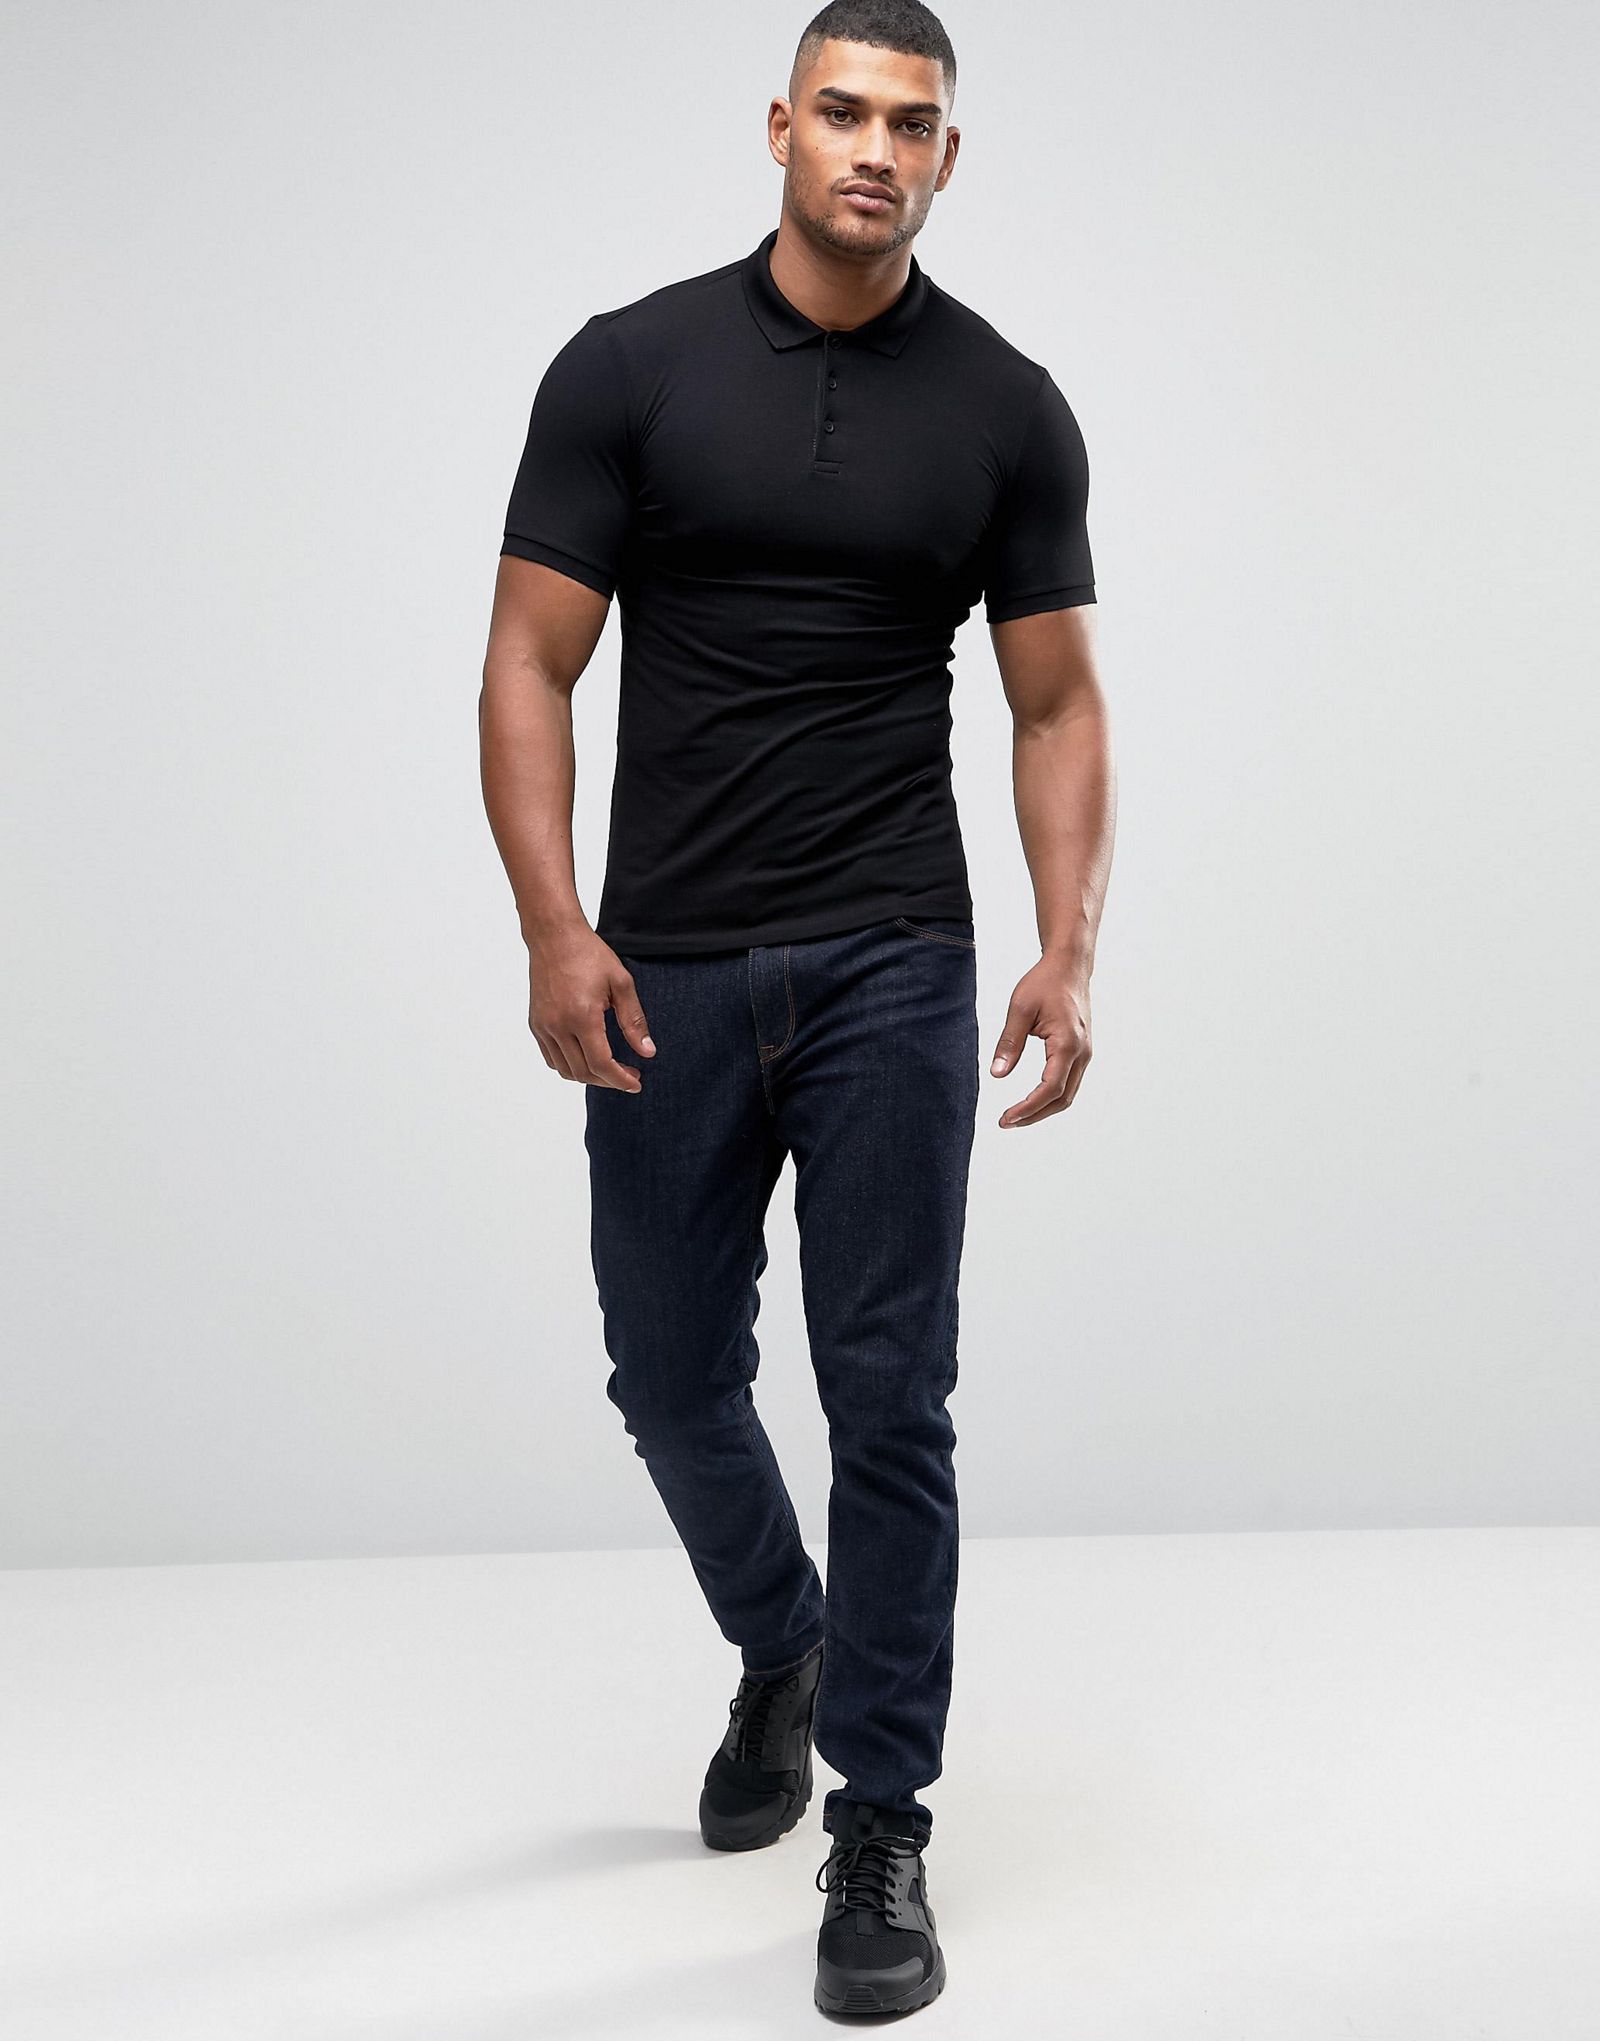 ASOS Extreme Muscle Polo Shirt In Black